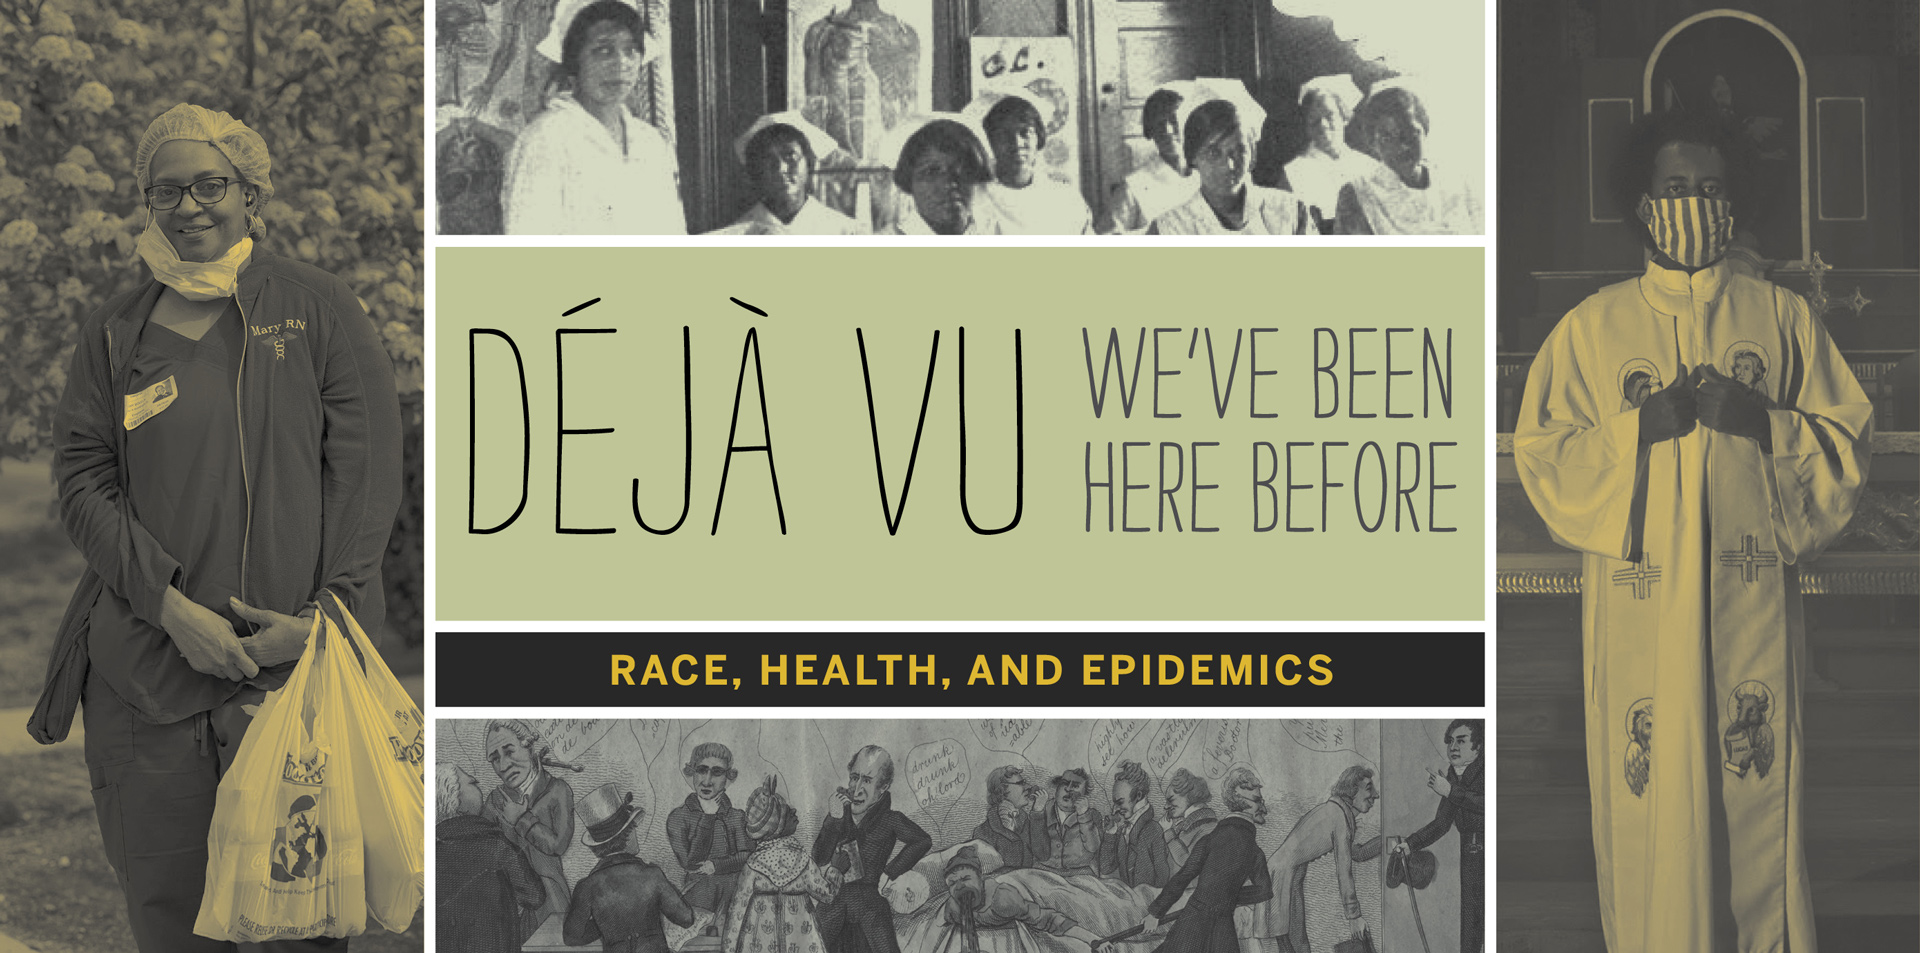 a collage of images of healthworkers from history